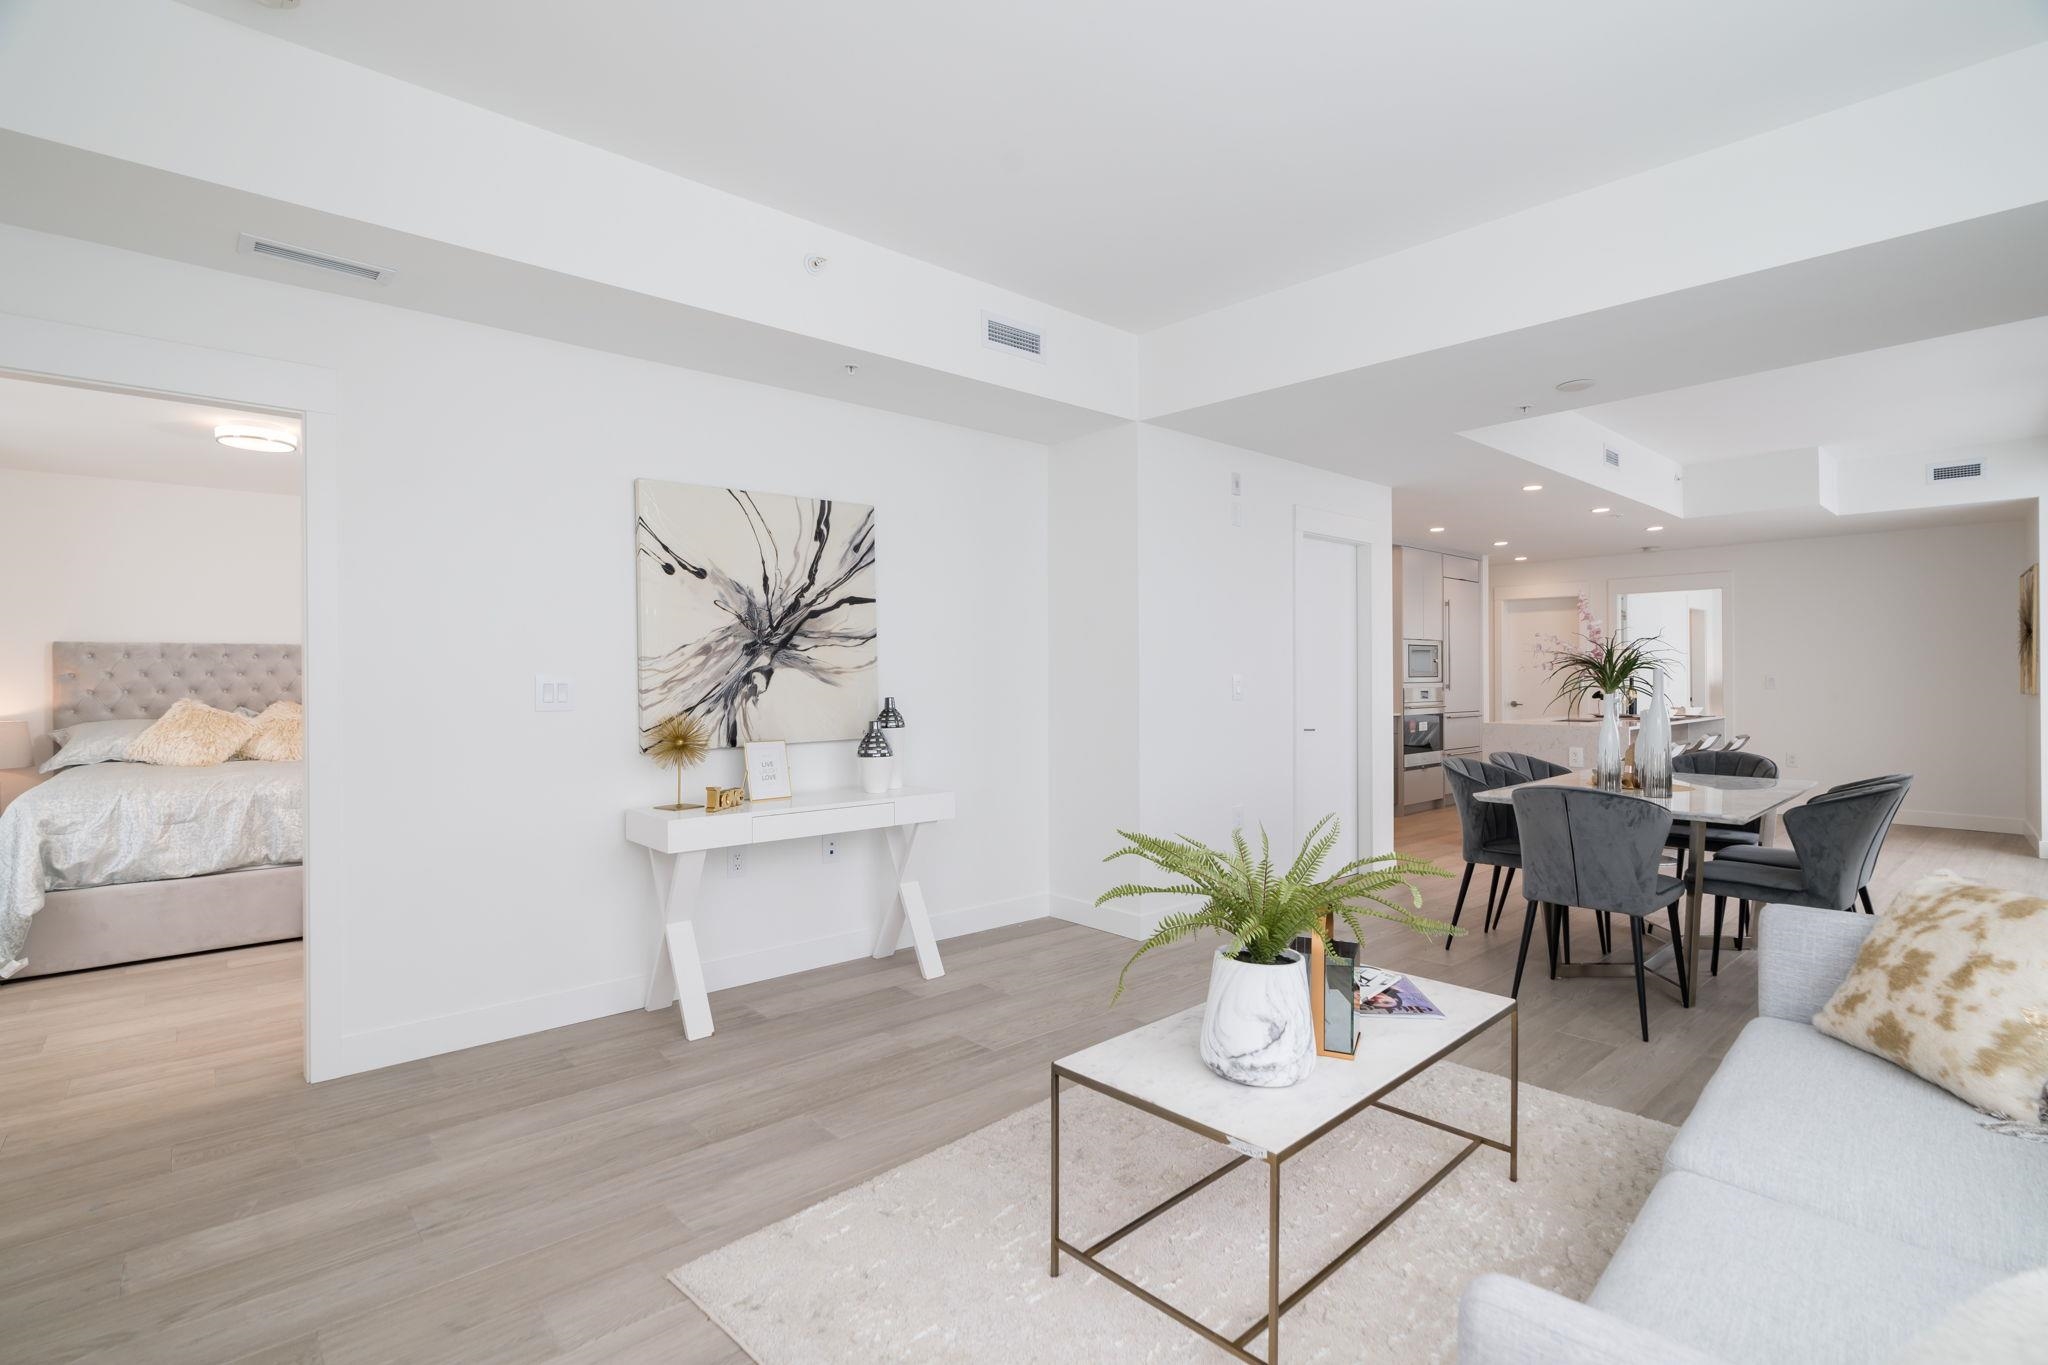 Listing image of 501 7638 CAMBIE STREET